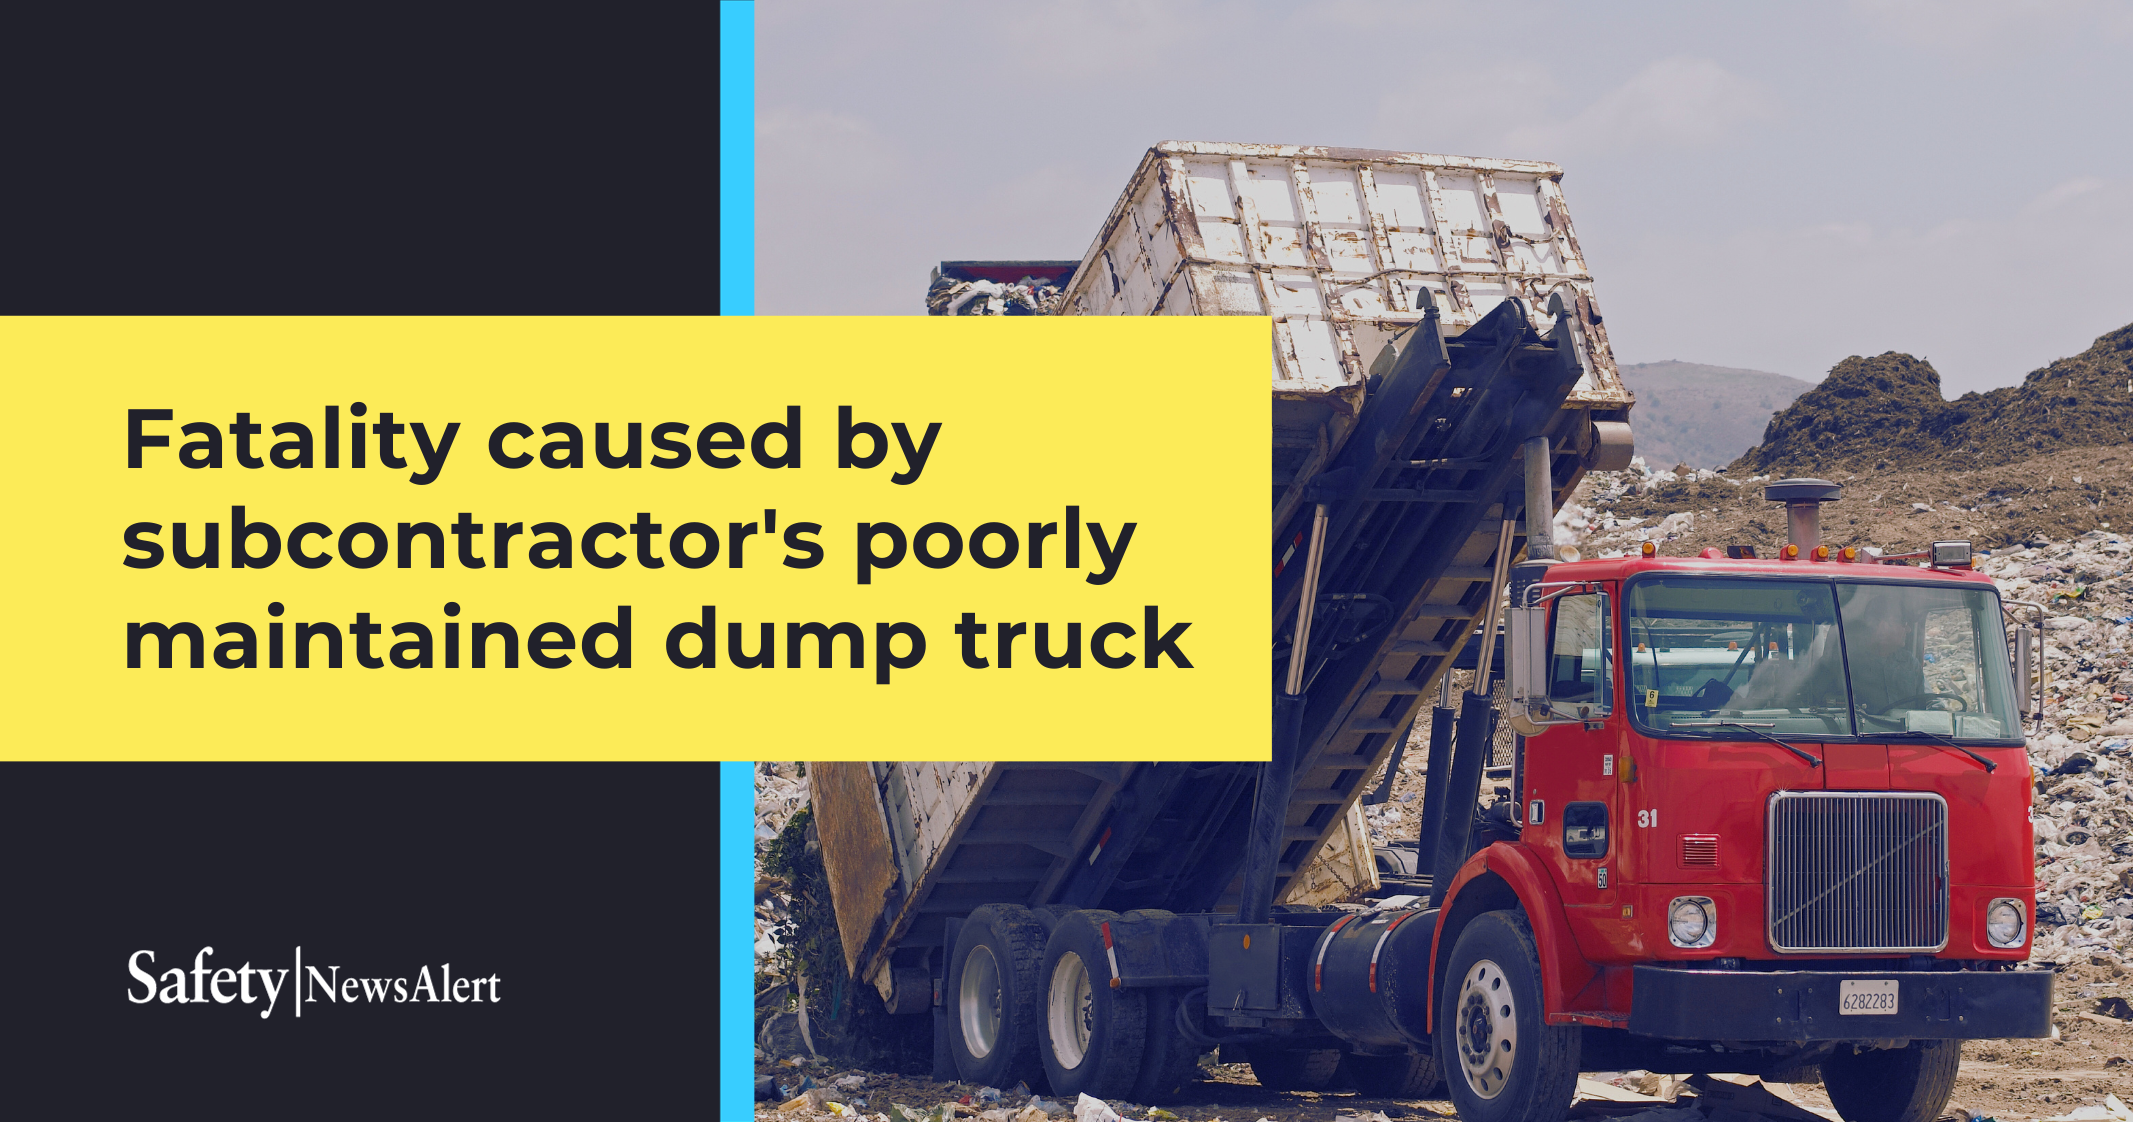 Fatality caused by subcontractor's poorly maintained dump truck